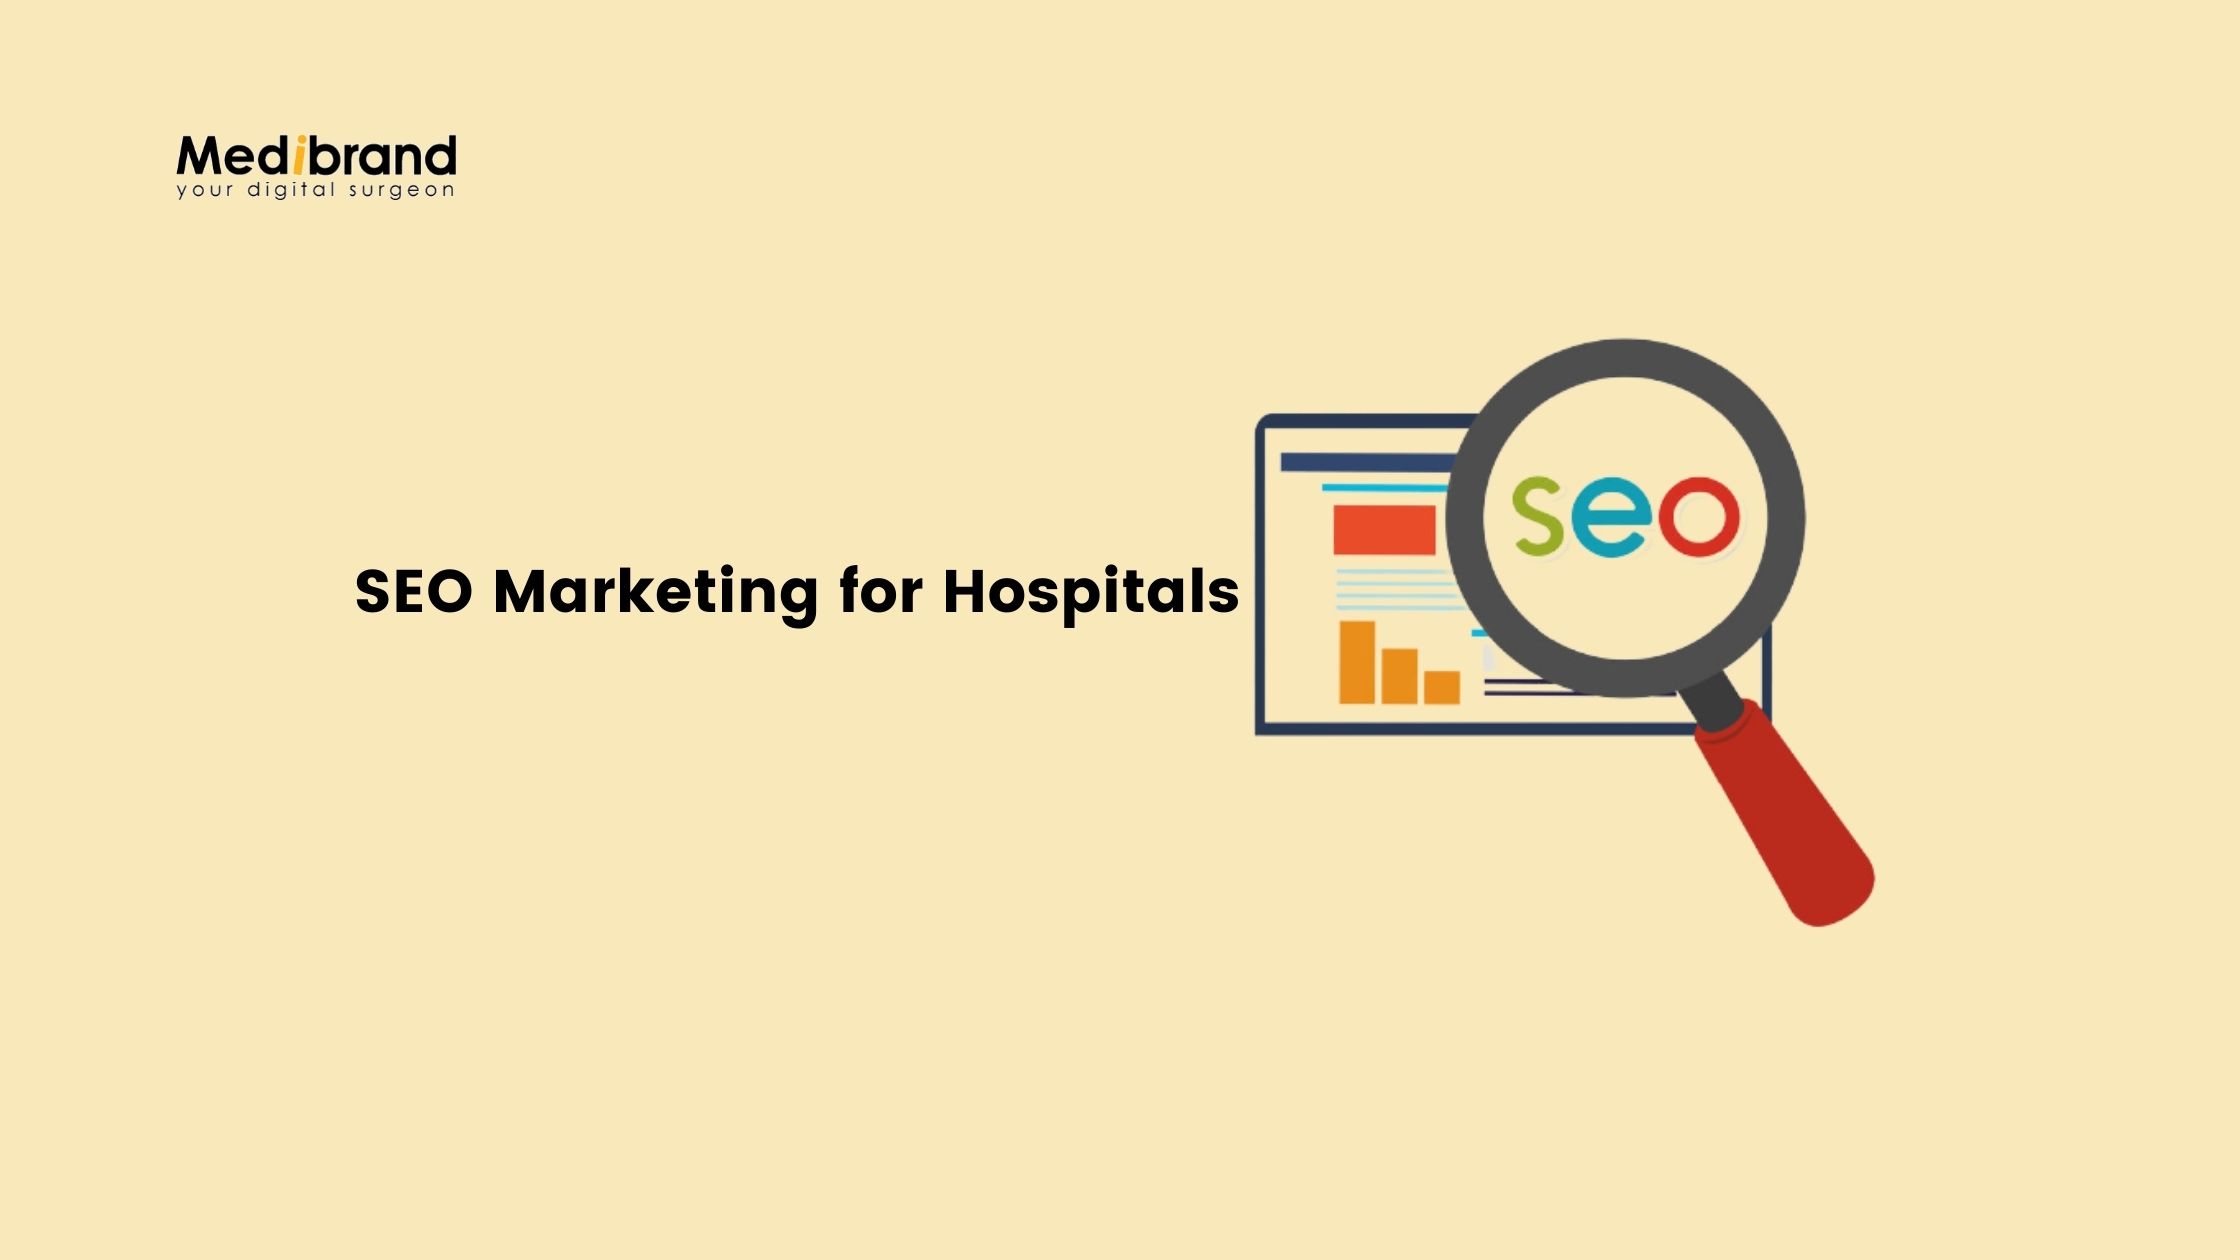 Article about SEO Marketing for Hospitals | SEO Strategy for Hospitals